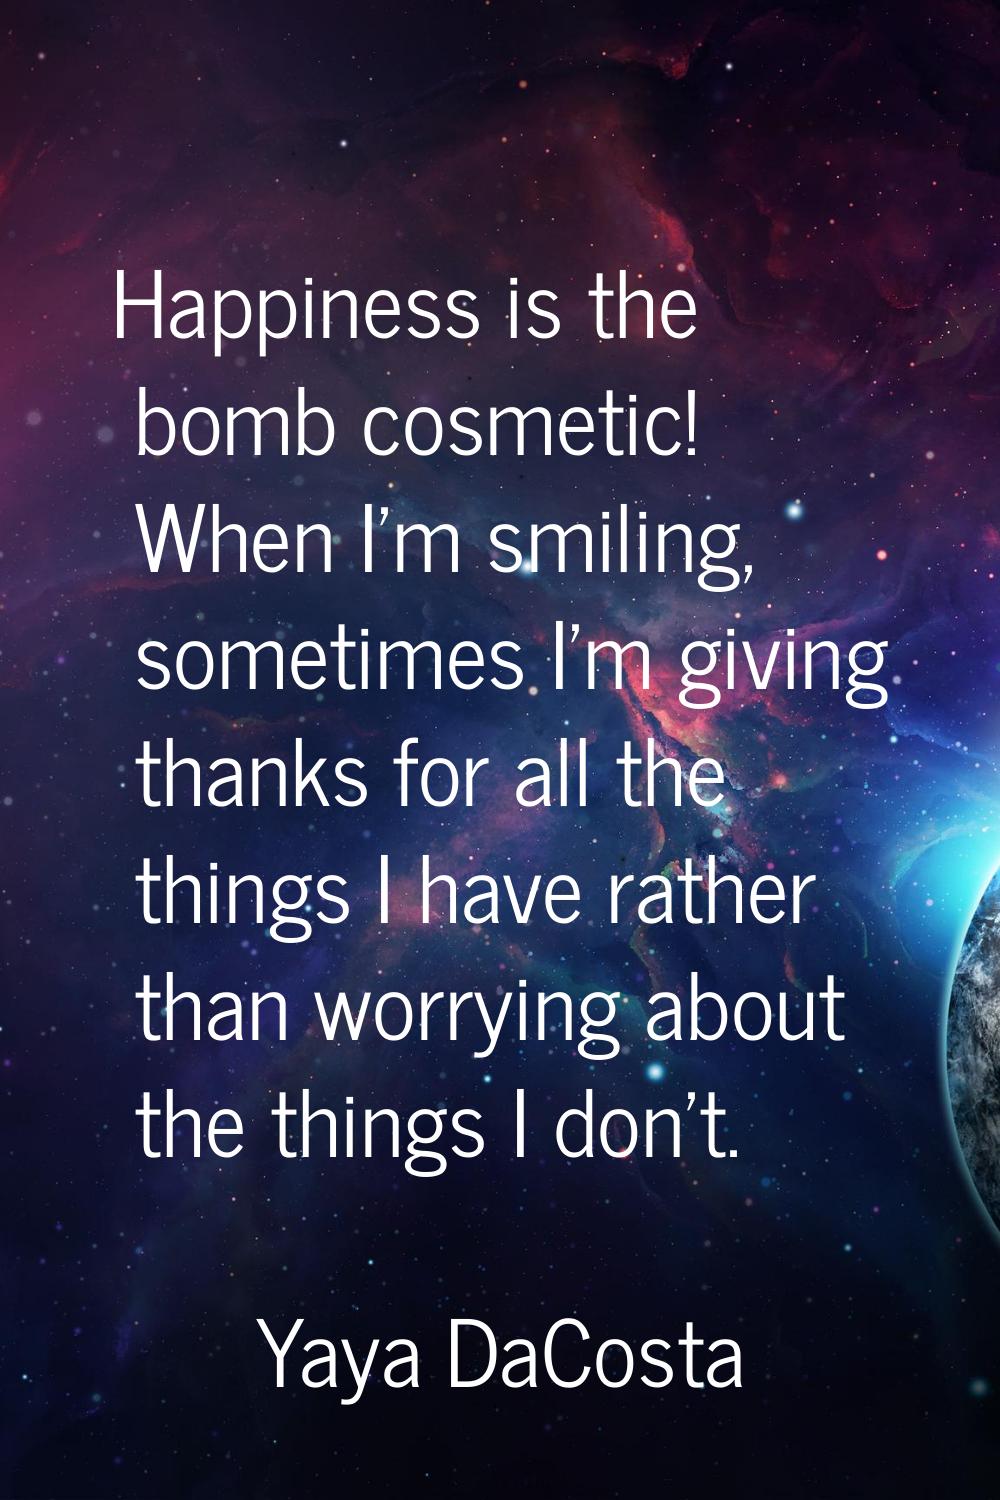 Happiness is the bomb cosmetic! When I'm smiling, sometimes I'm giving thanks for all the things I 